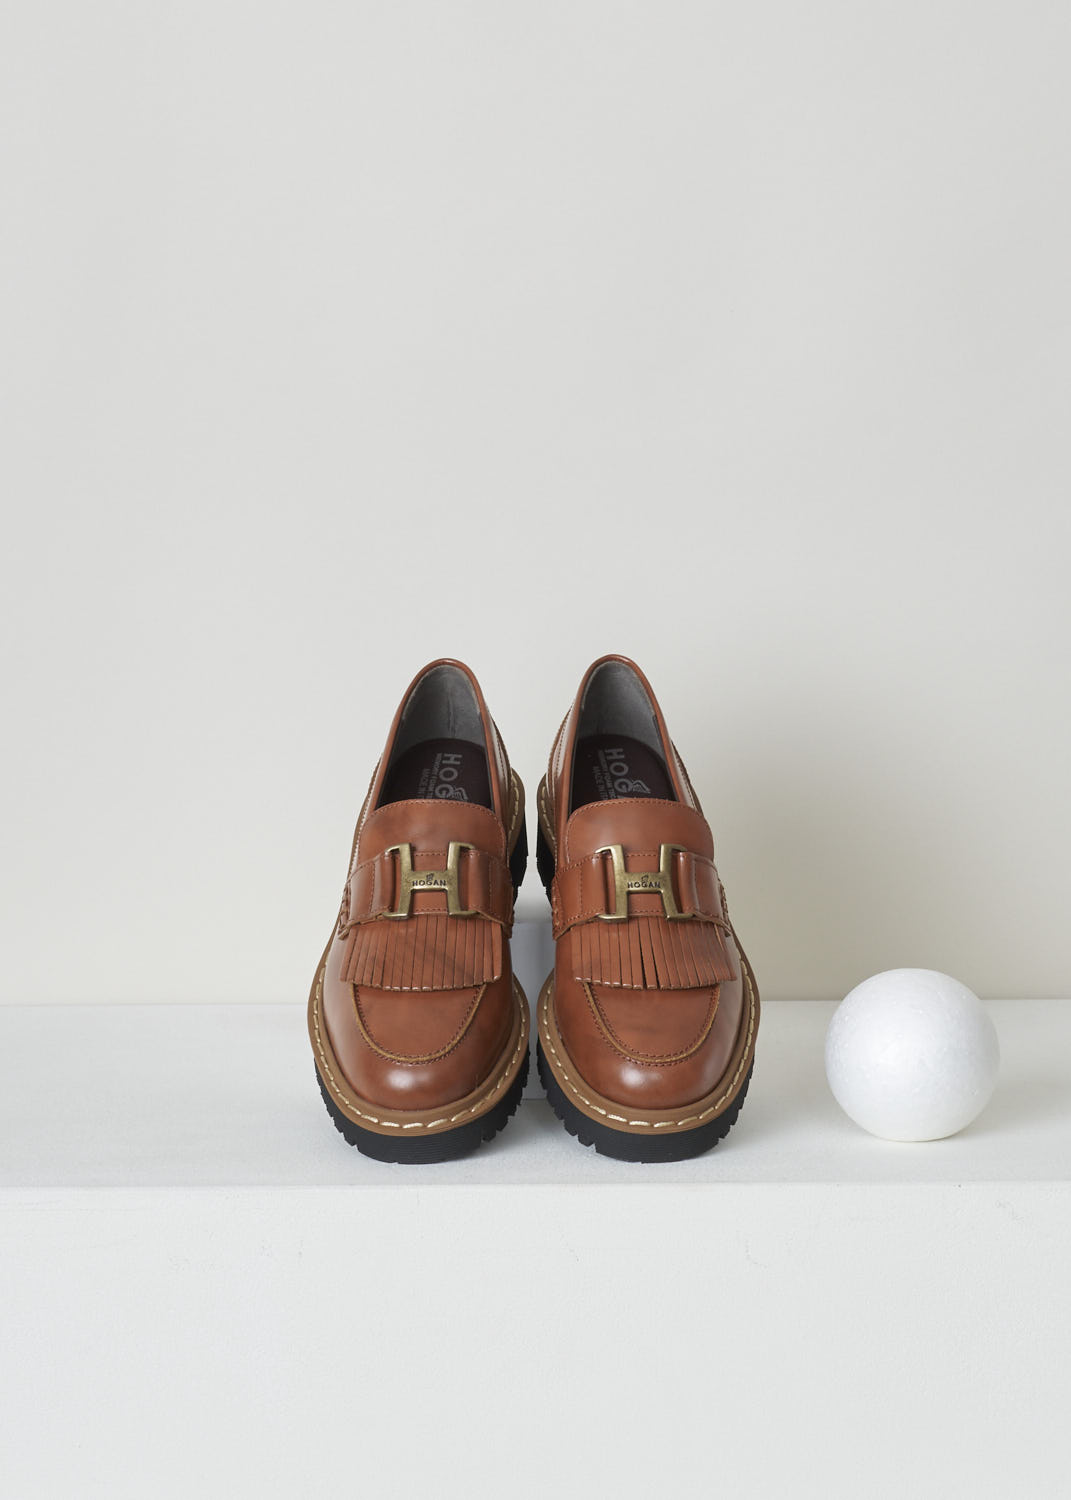 HOGAN, COGNAC MOCASSINS WITH BUCKLE AND TASSELS, HXW5430DH72Q7OS003, Brown, Top,  Cognac colored loafer. These slip-on loafers have a rounded toe with moccasin toe stitching and a H-shaped buckle and tassels over the upper side.

